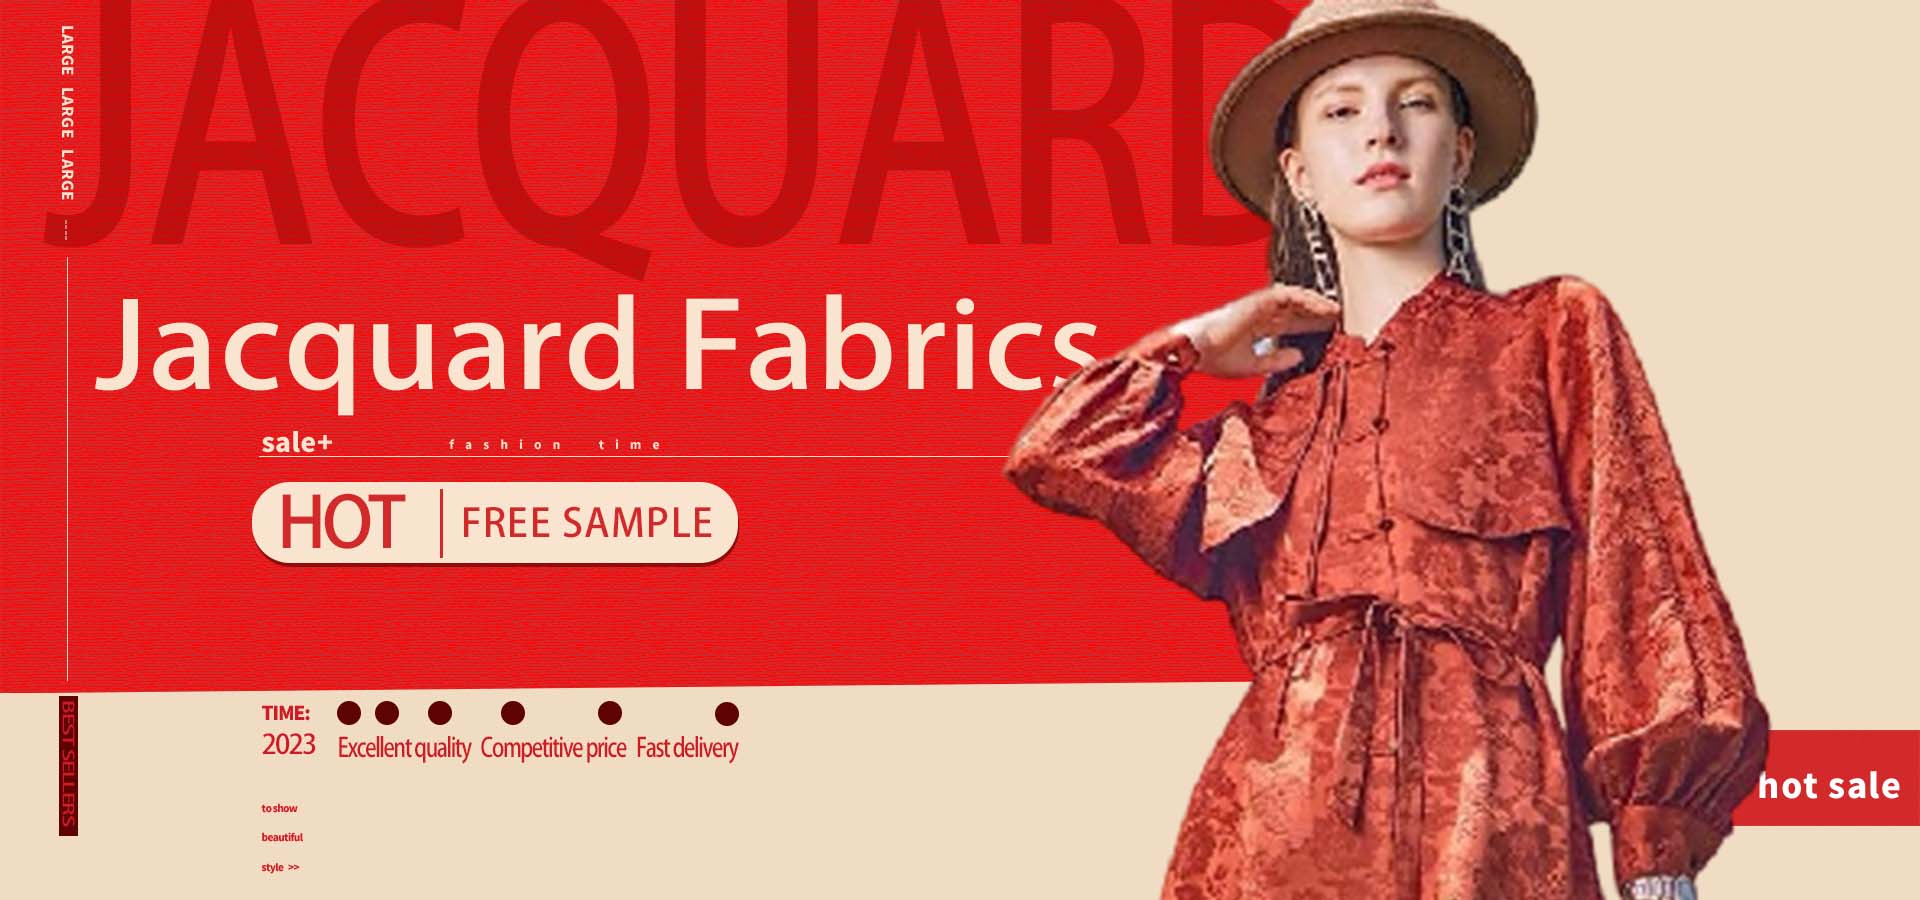 What Is Jacquard Fabric ？